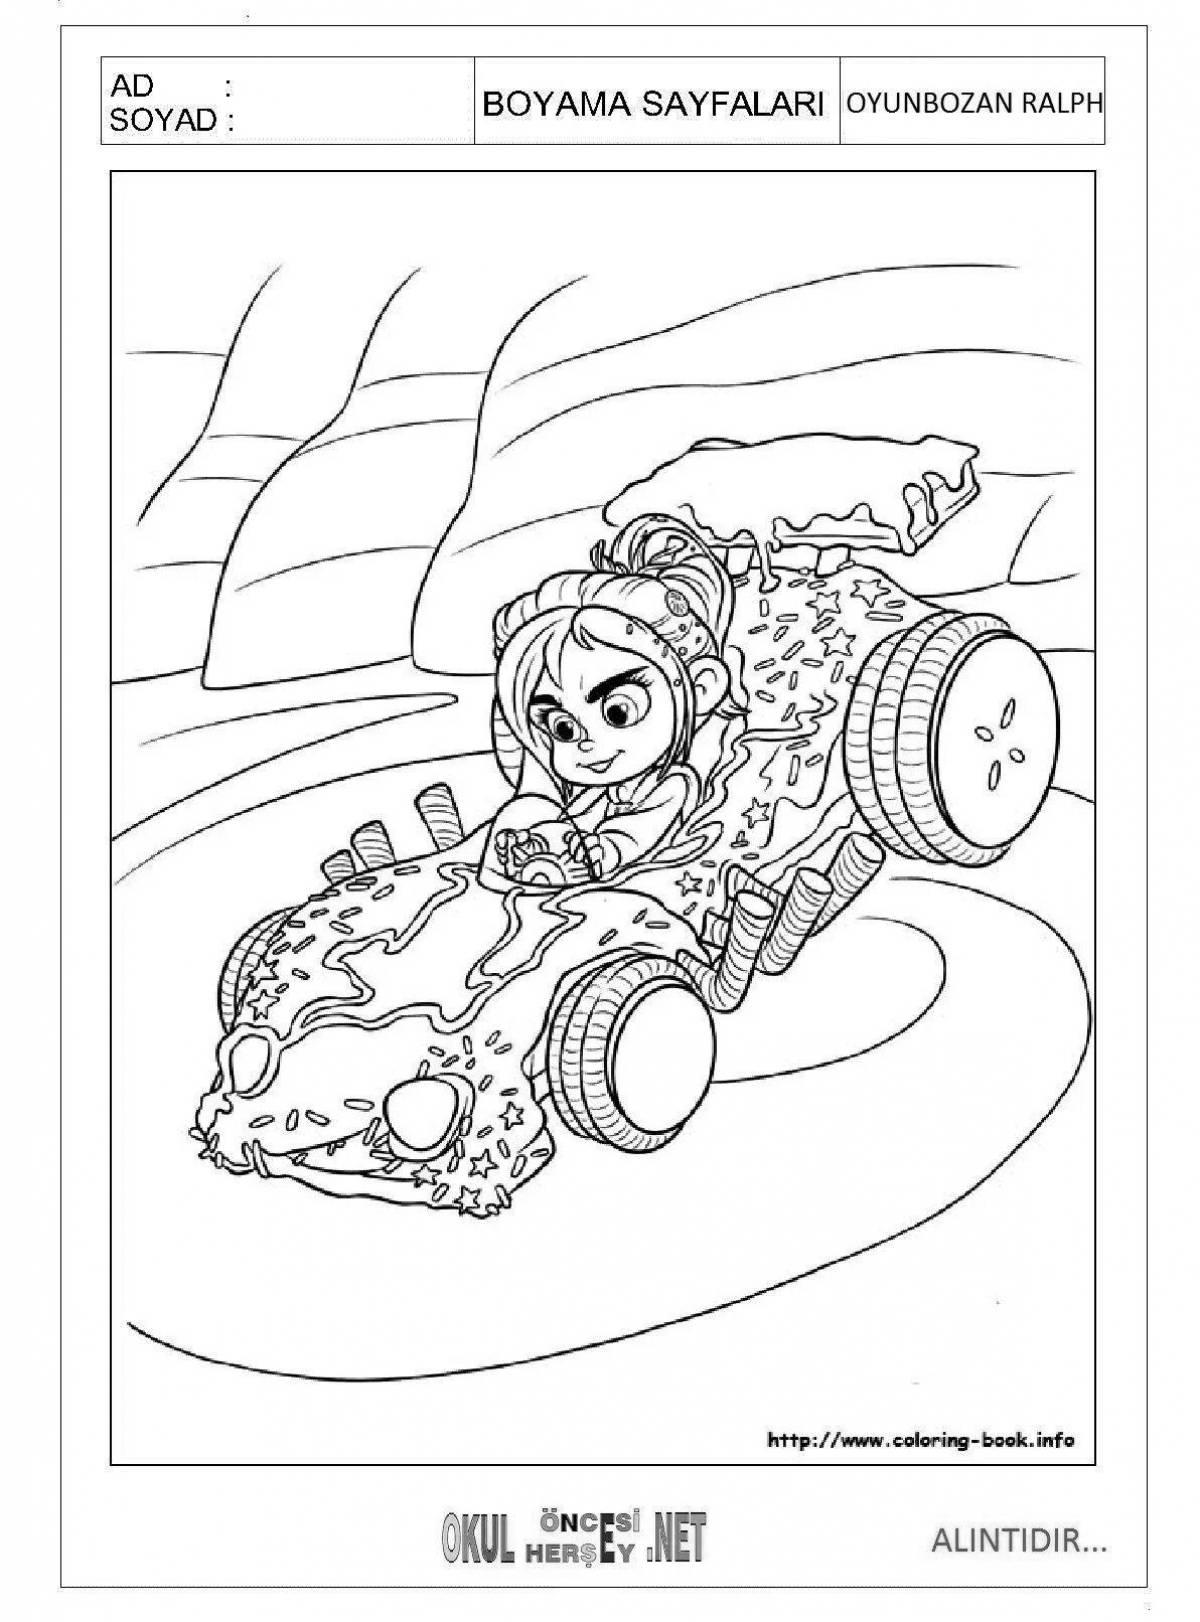 Vanellope and ralph's wonderful coloring book